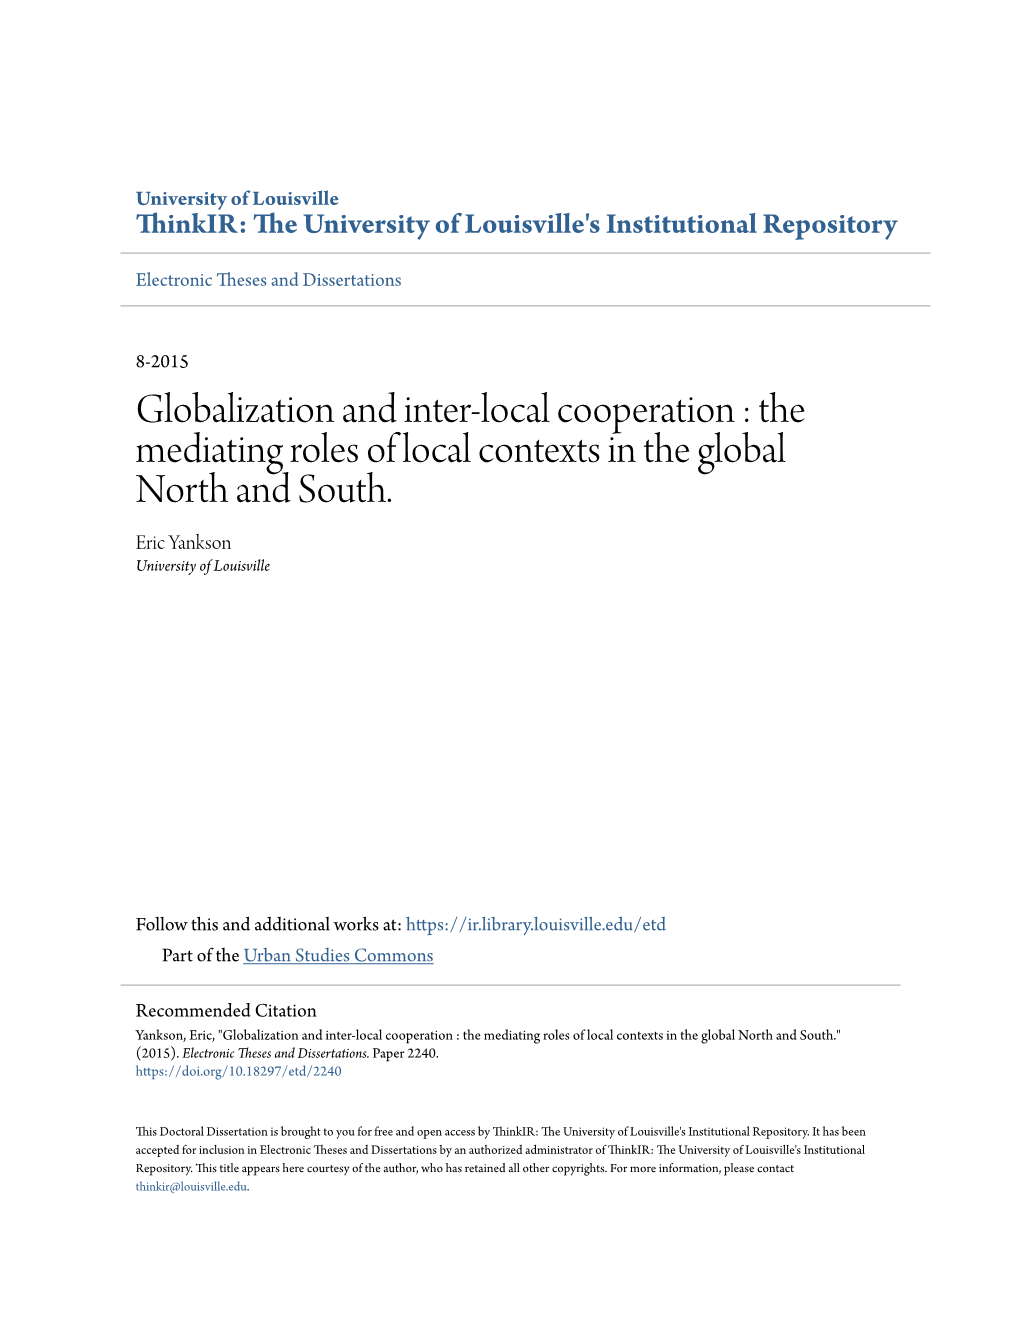 Globalization and Inter-Local Cooperation : the Mediating Roles of Local Contexts in the Global North and South. Eric Yankson University of Louisville